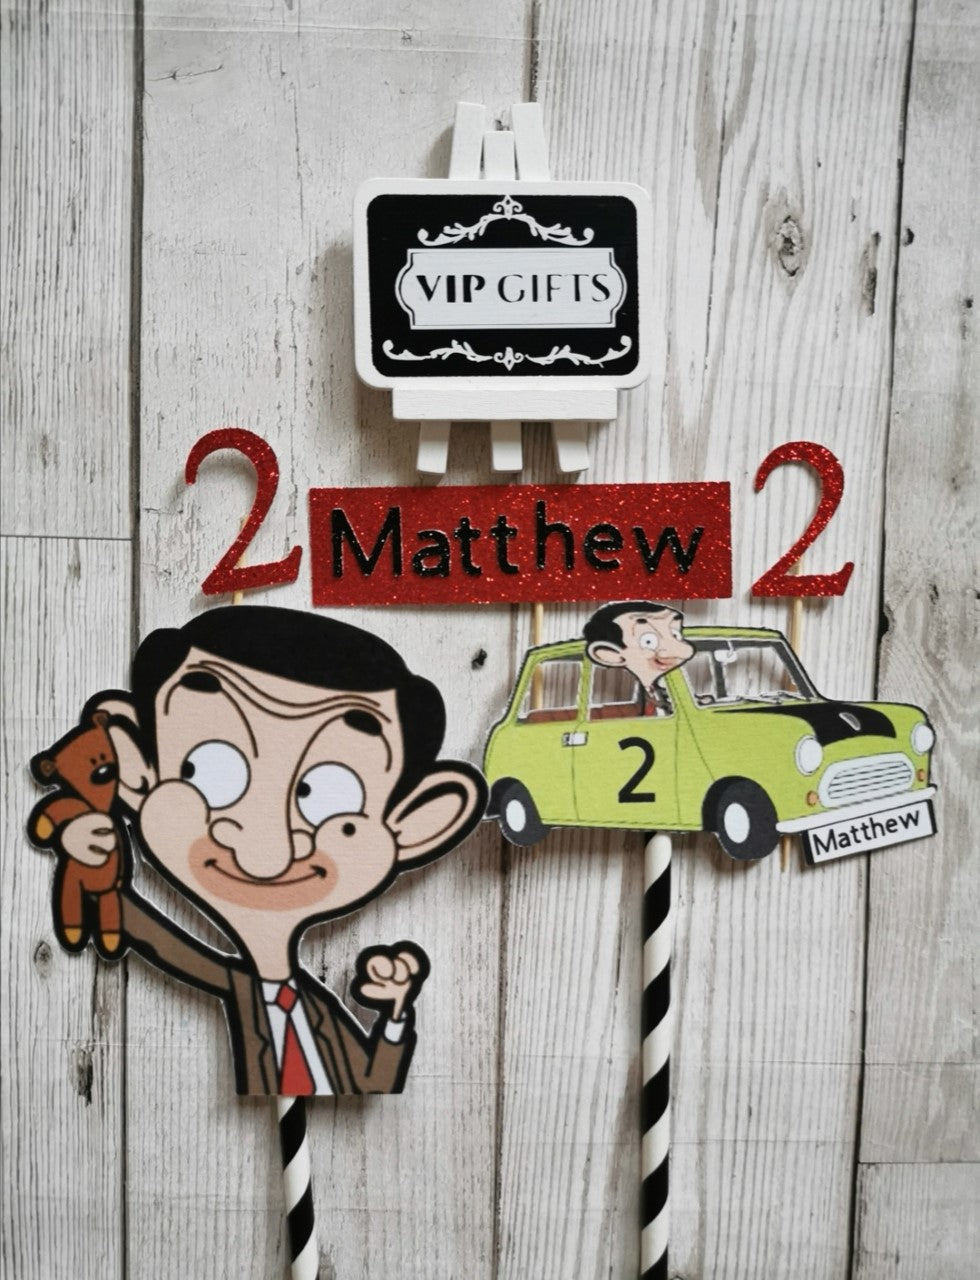 Mr Bean Special Delivery Cake | Baked by Nataleen